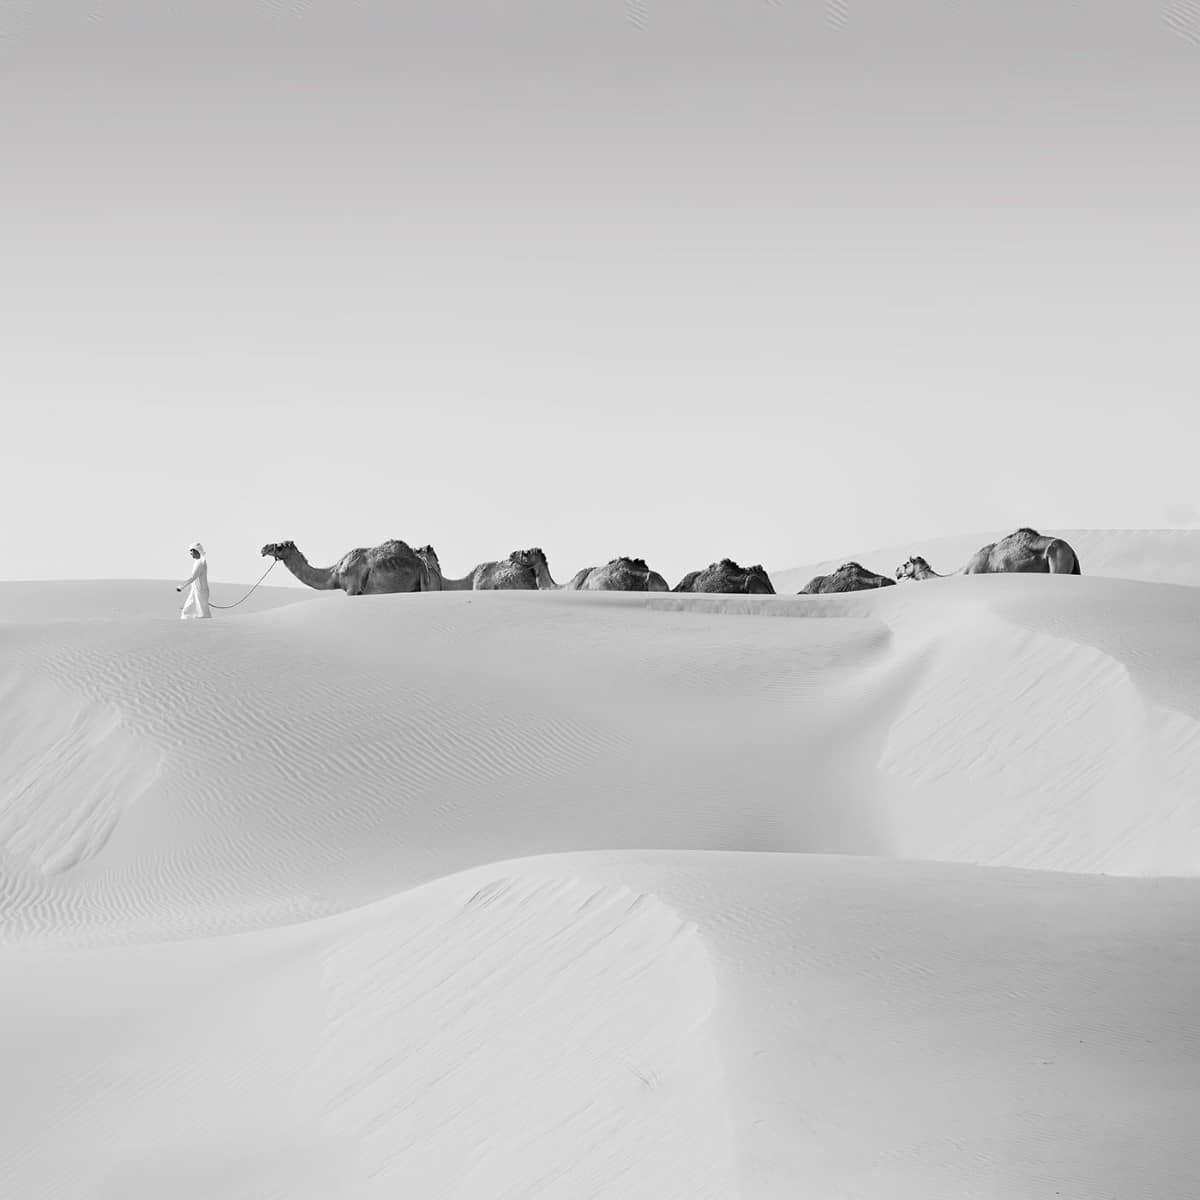 Person leading camels across the desert in Abu Dhabi